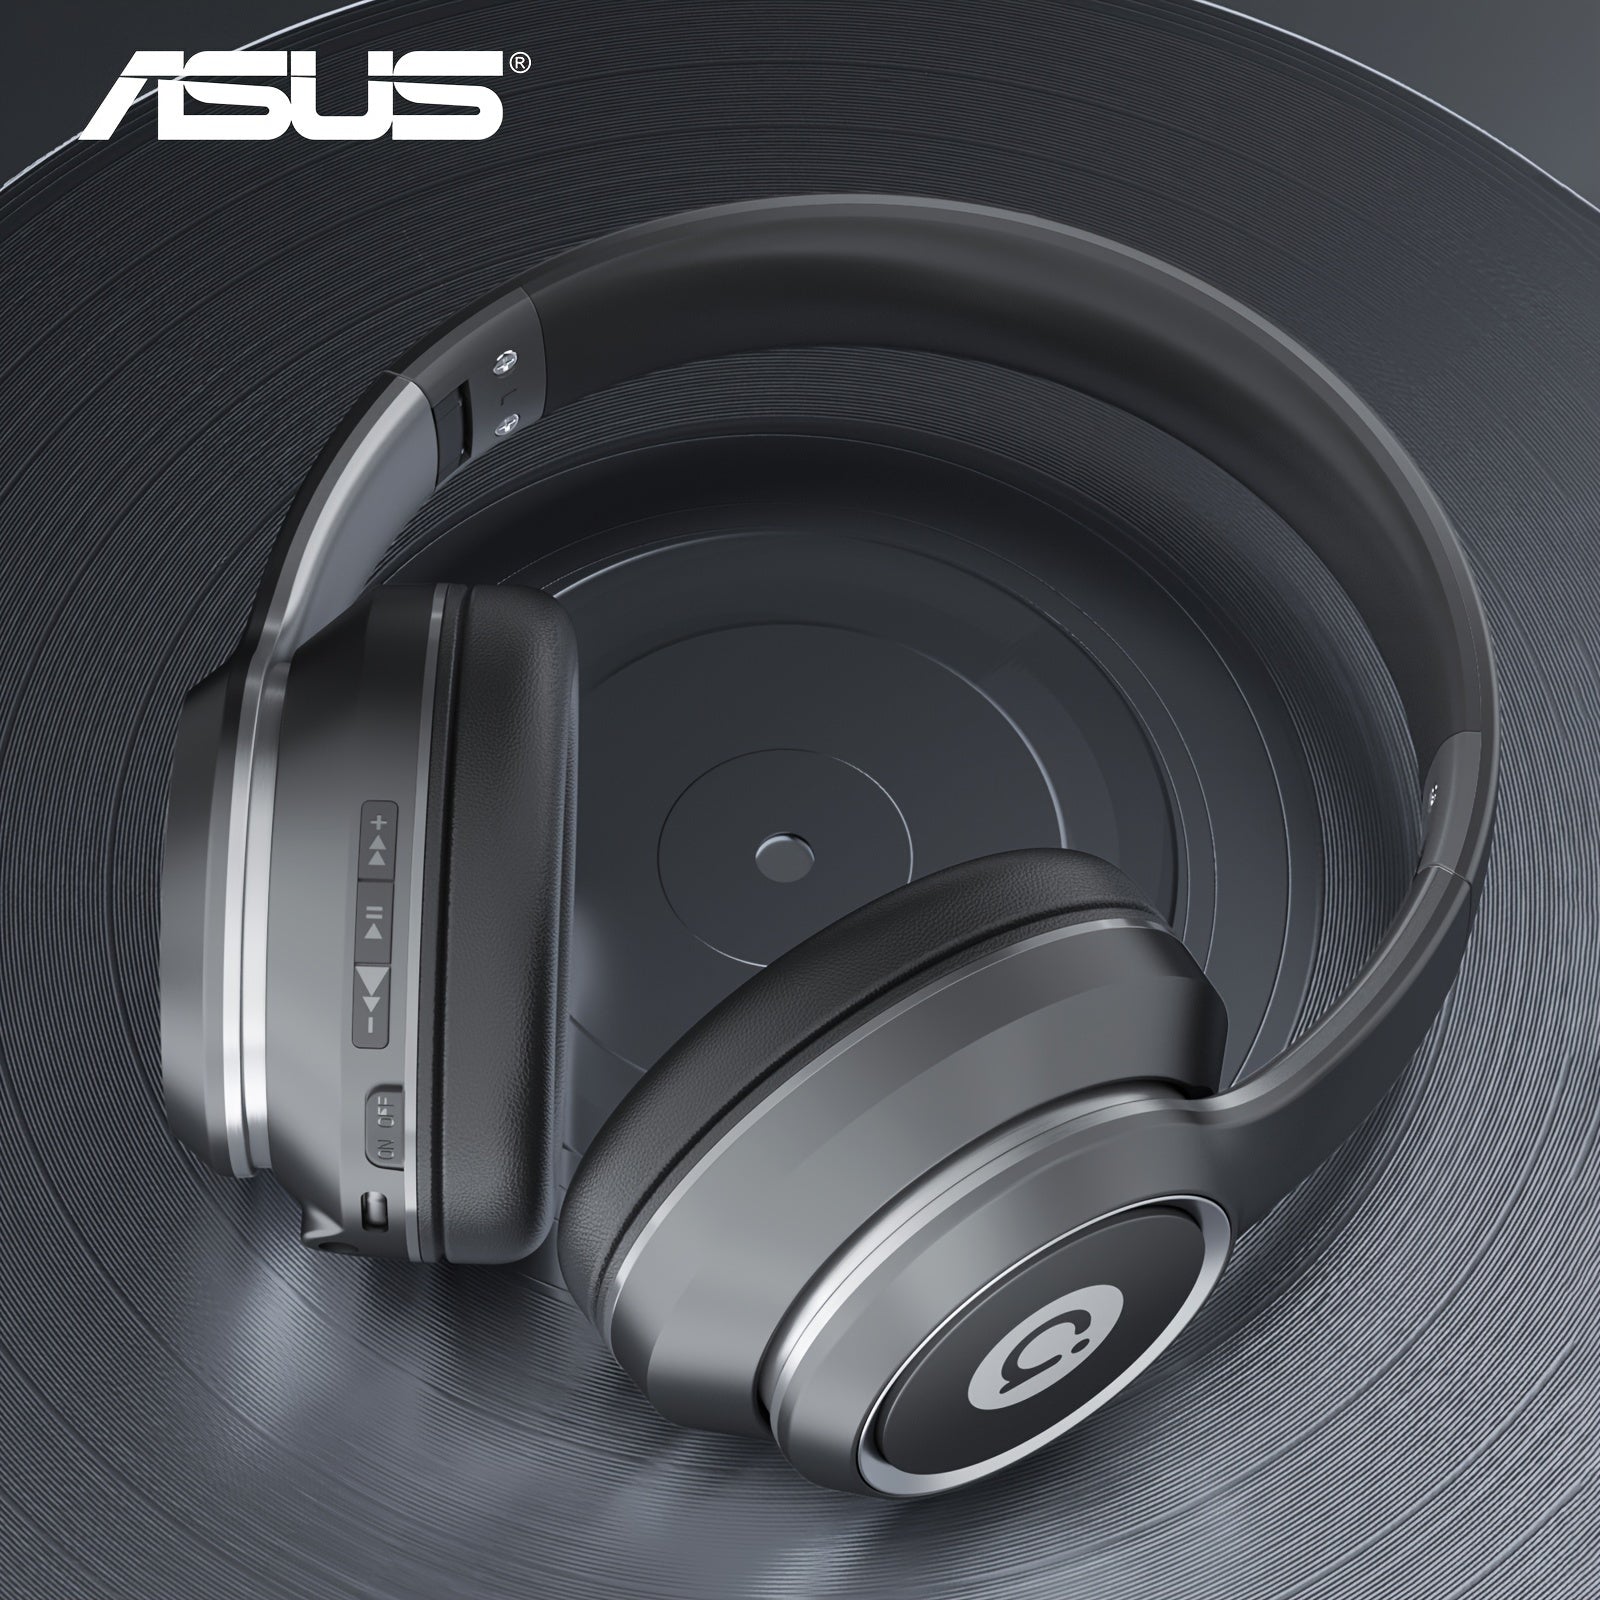 ASUS AS-D96 5.3 Wireless earphone Headphones with Microphone Lightweight Folding Active noise reduction ANC HD Call Earphone